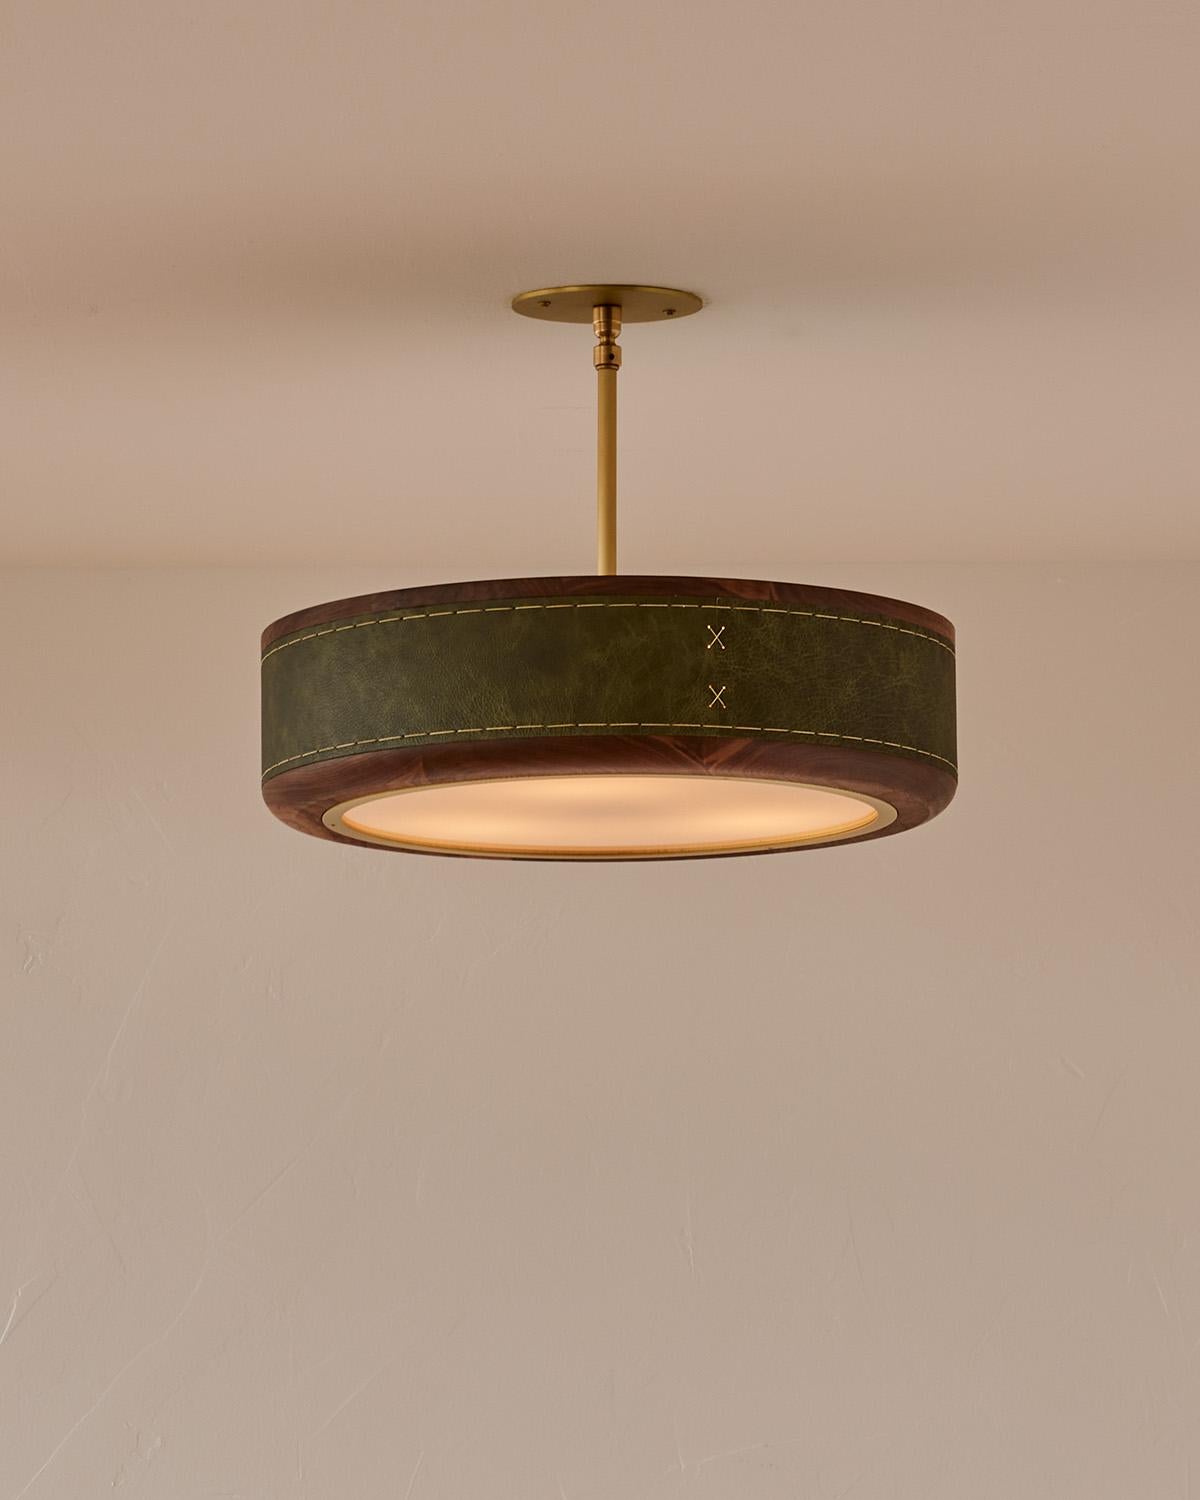 The Nura Ceiling Fixture combines hand-stitched leather over walnut accented by a brass pole and canopy. This fixture can either be hung as a ceiling surface mount or a pendant supported by a brass pole.

OVERALL DIMENSIONS
Shade: 18